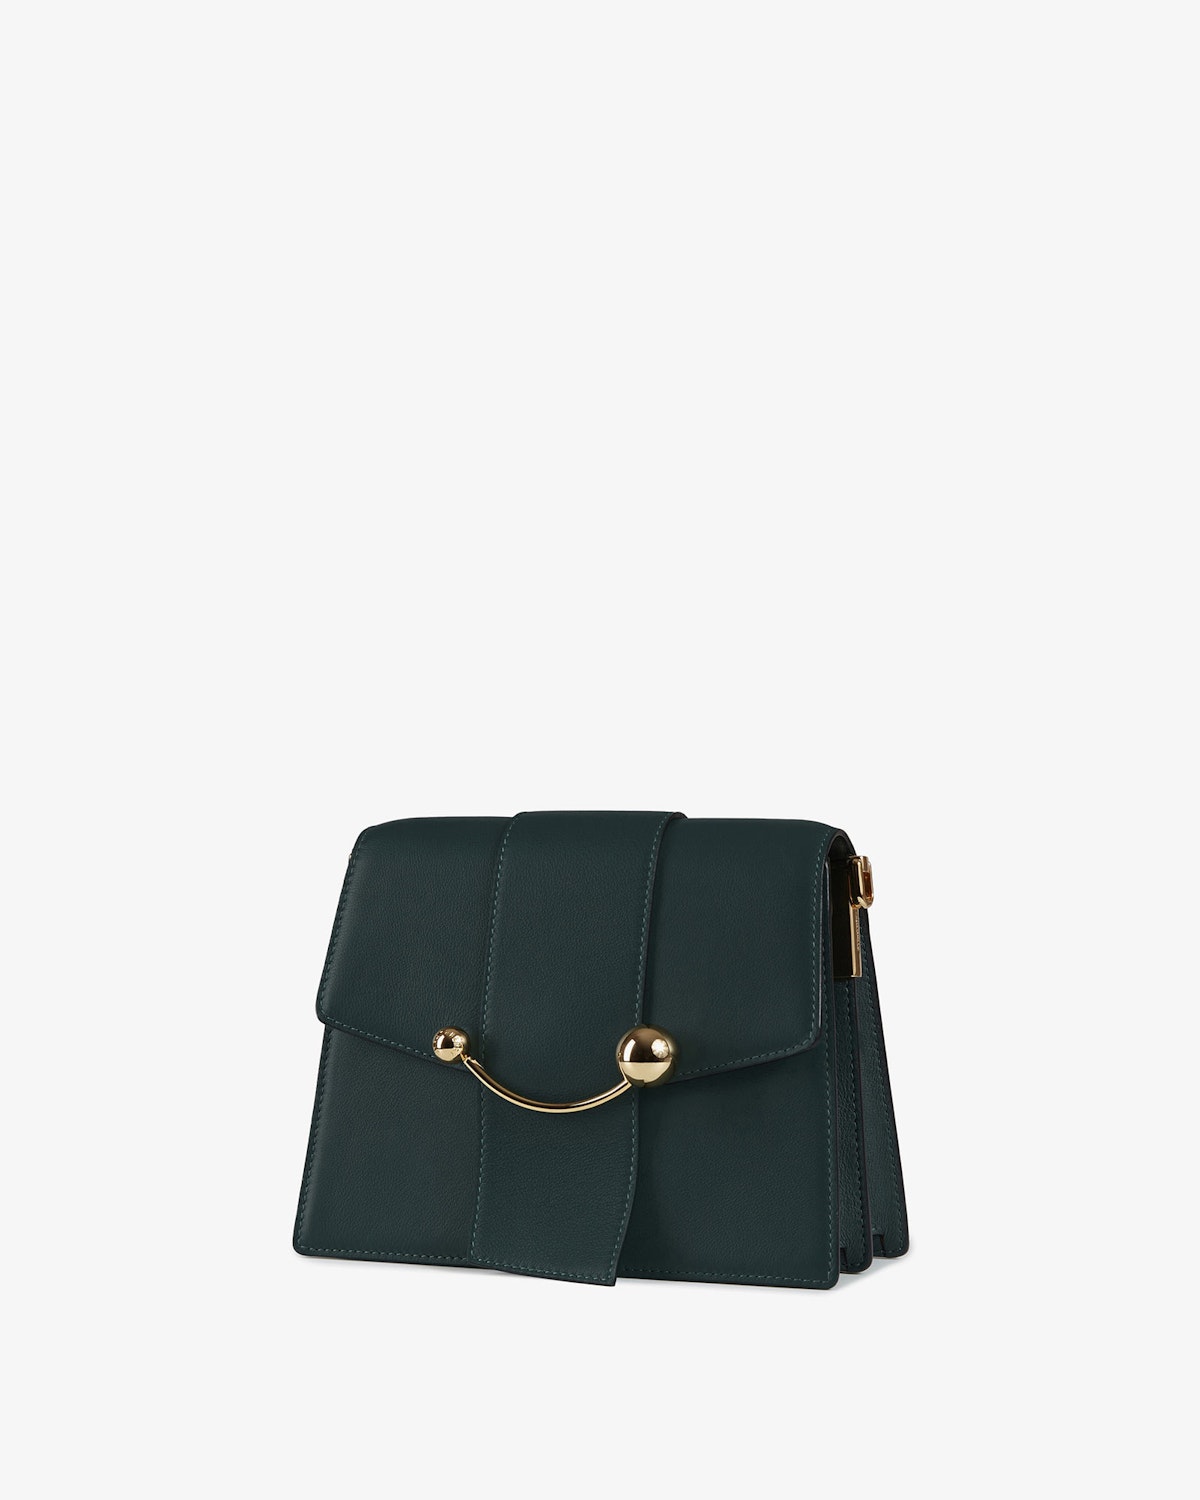 Strathberry - Box Crescent - Leather Shoulder Bag - Green | Strathberry